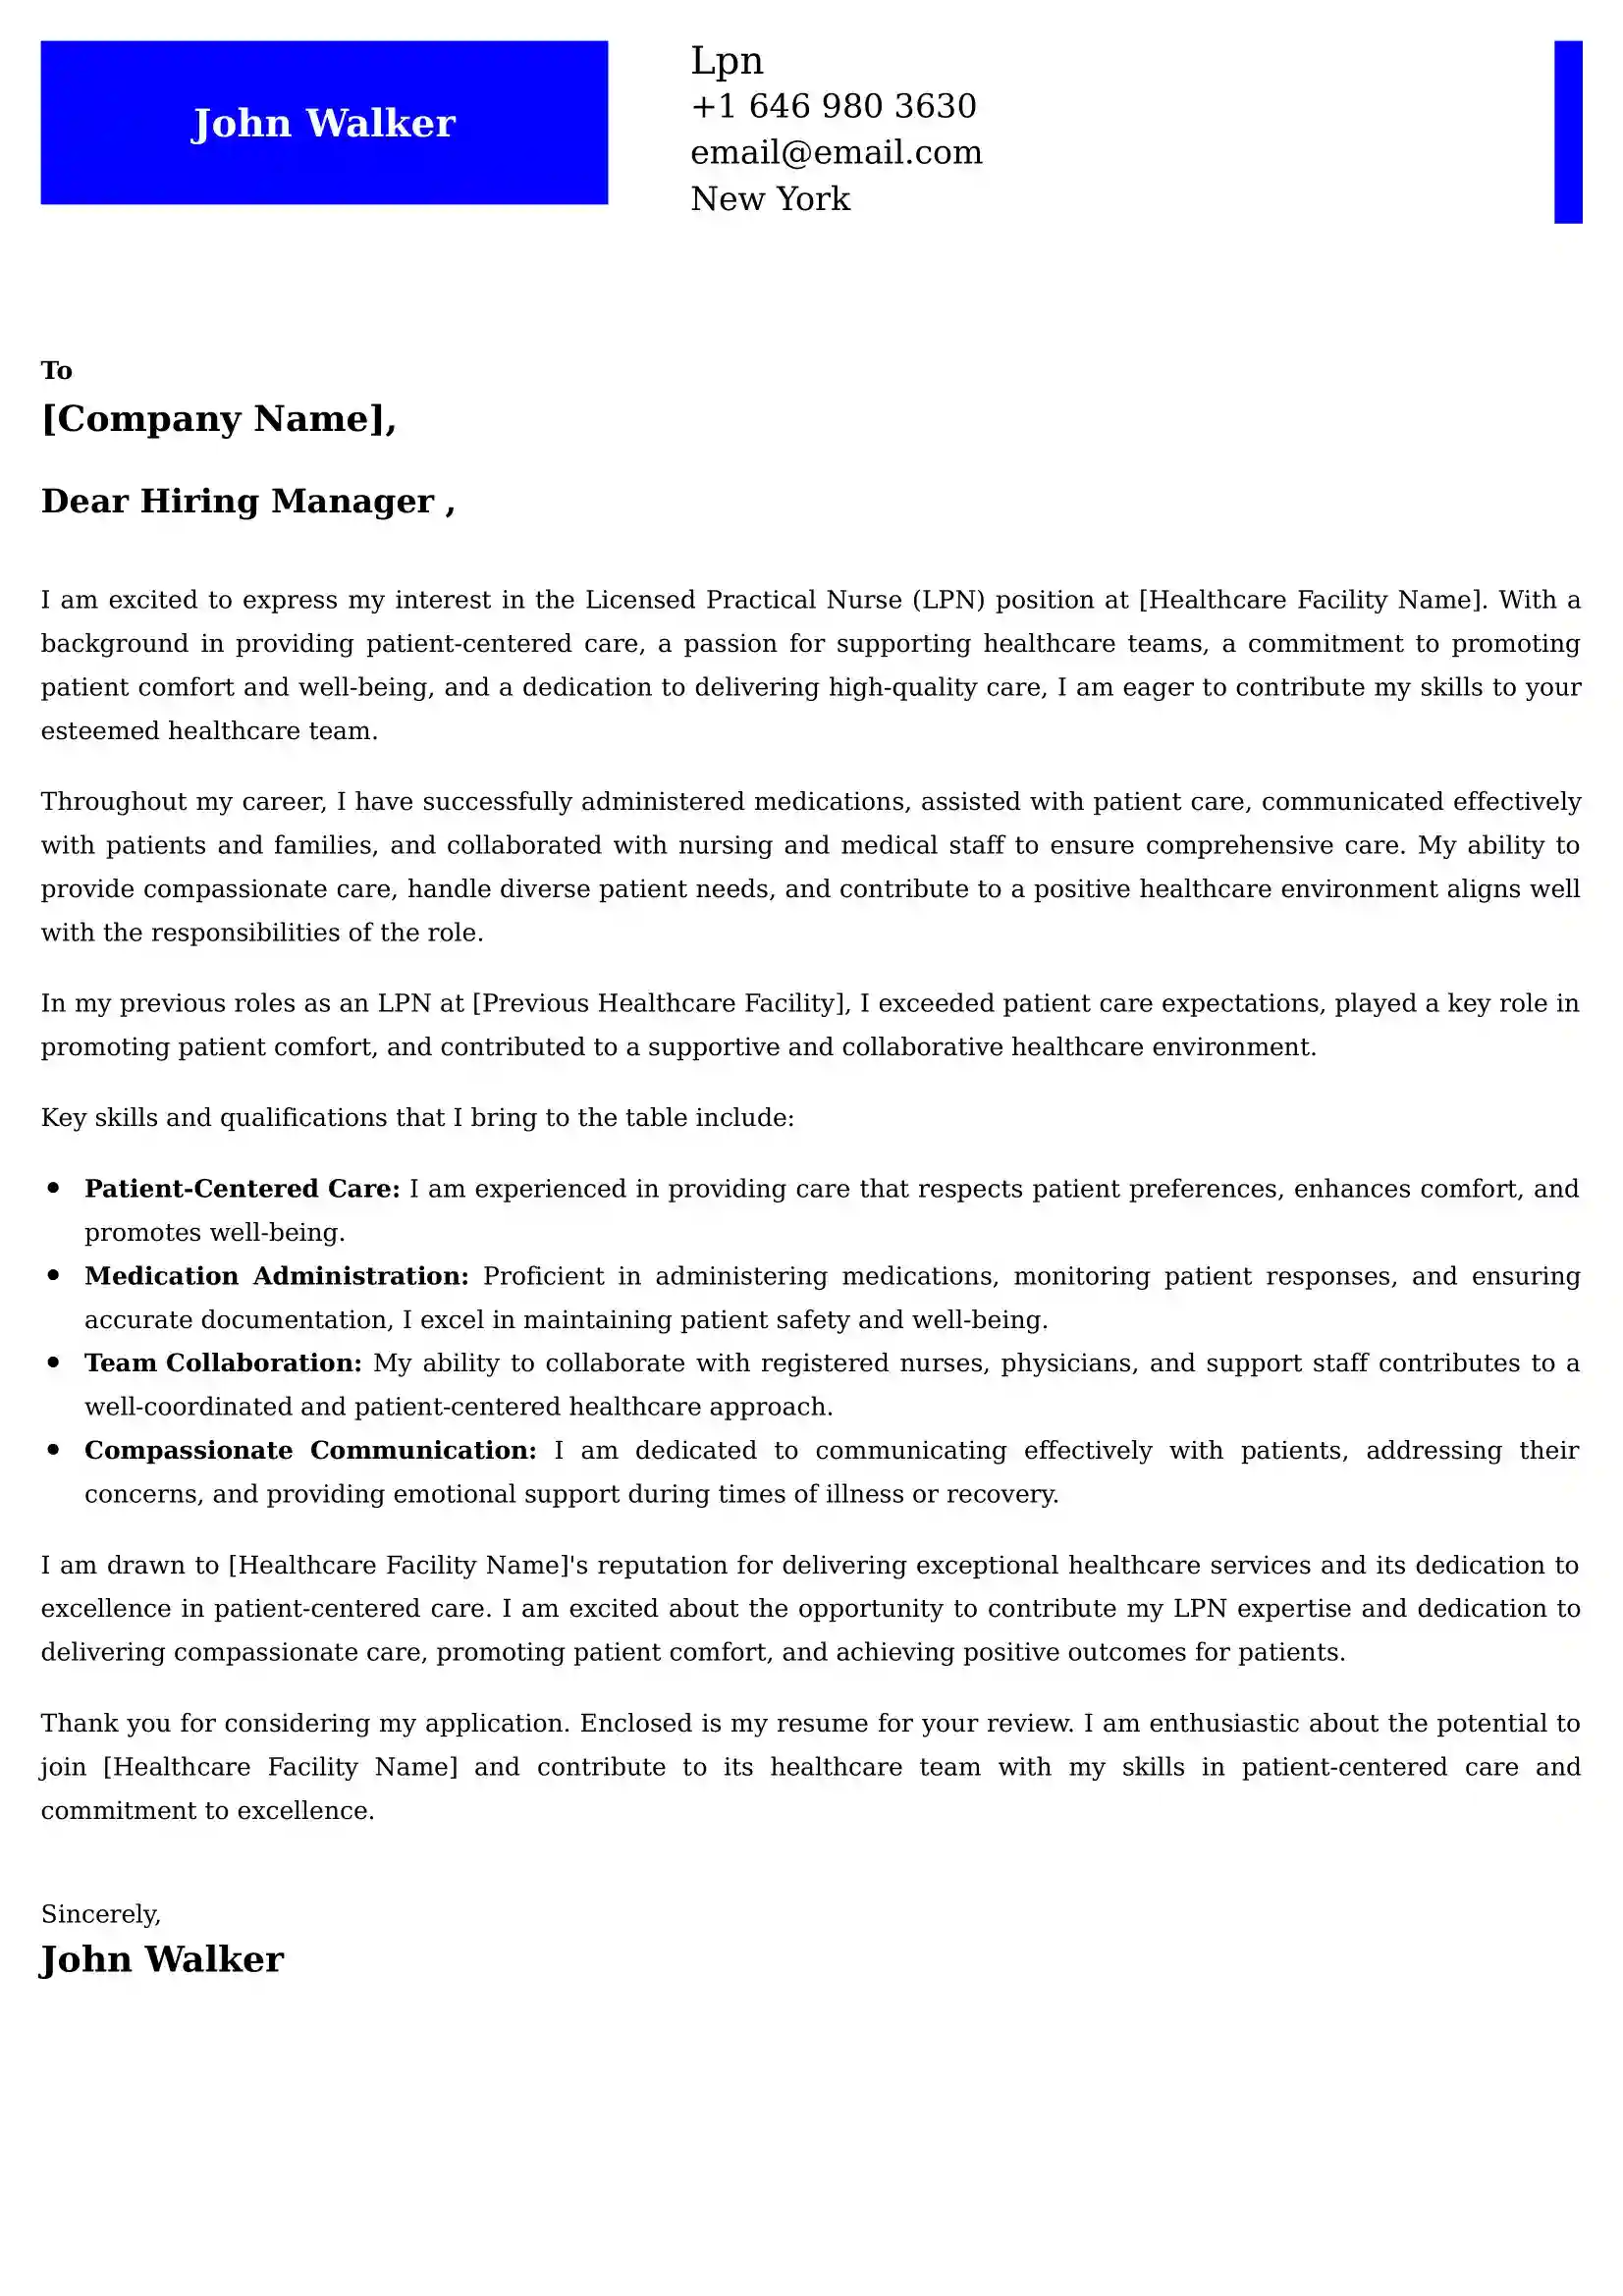 Lpn Cover Letter Examples -Latest Brazilian Templates